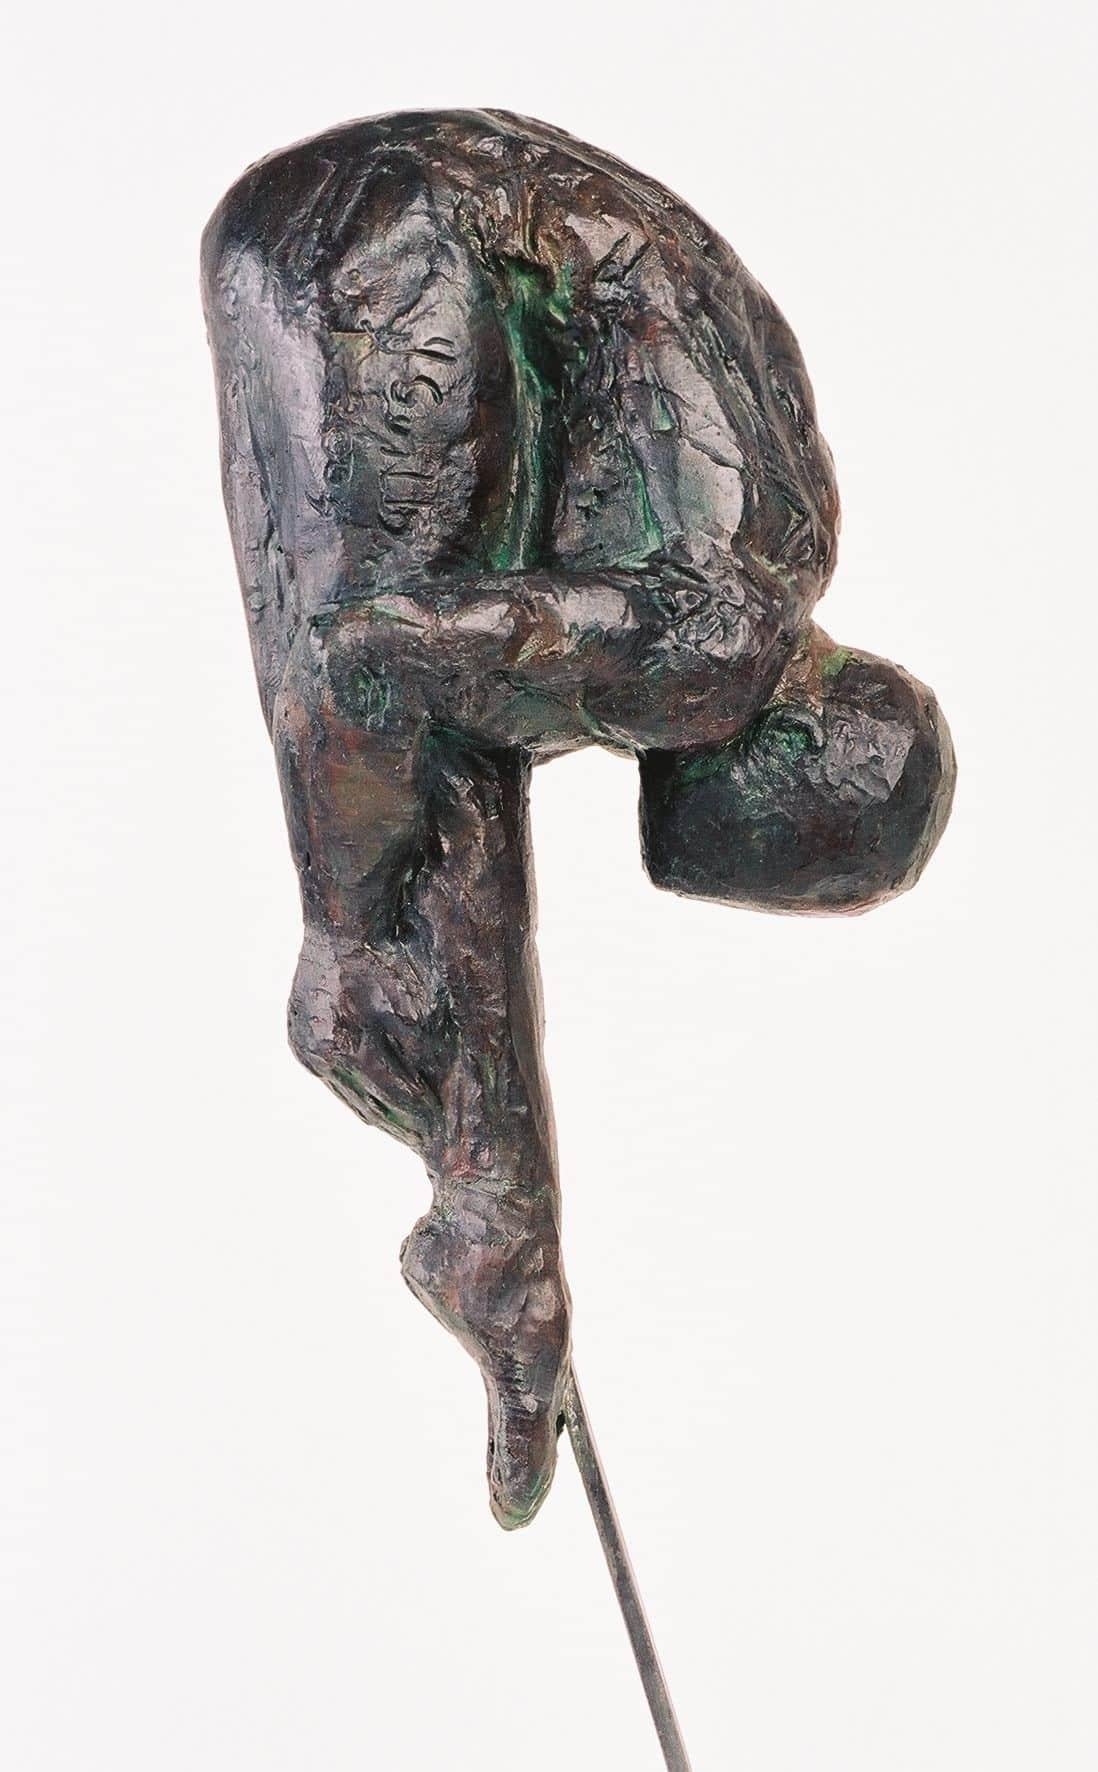 Little Diver is a bronze sculpture by contemporary artist Yann Guillon, dimensions are 38 × 18 × 20 cm (15 × 7.1 × 7.9 in). Height of the sculpture with the metal base: 63 cm (24.8 in). 
The sculpture is signed and numbered, it is part of a limited